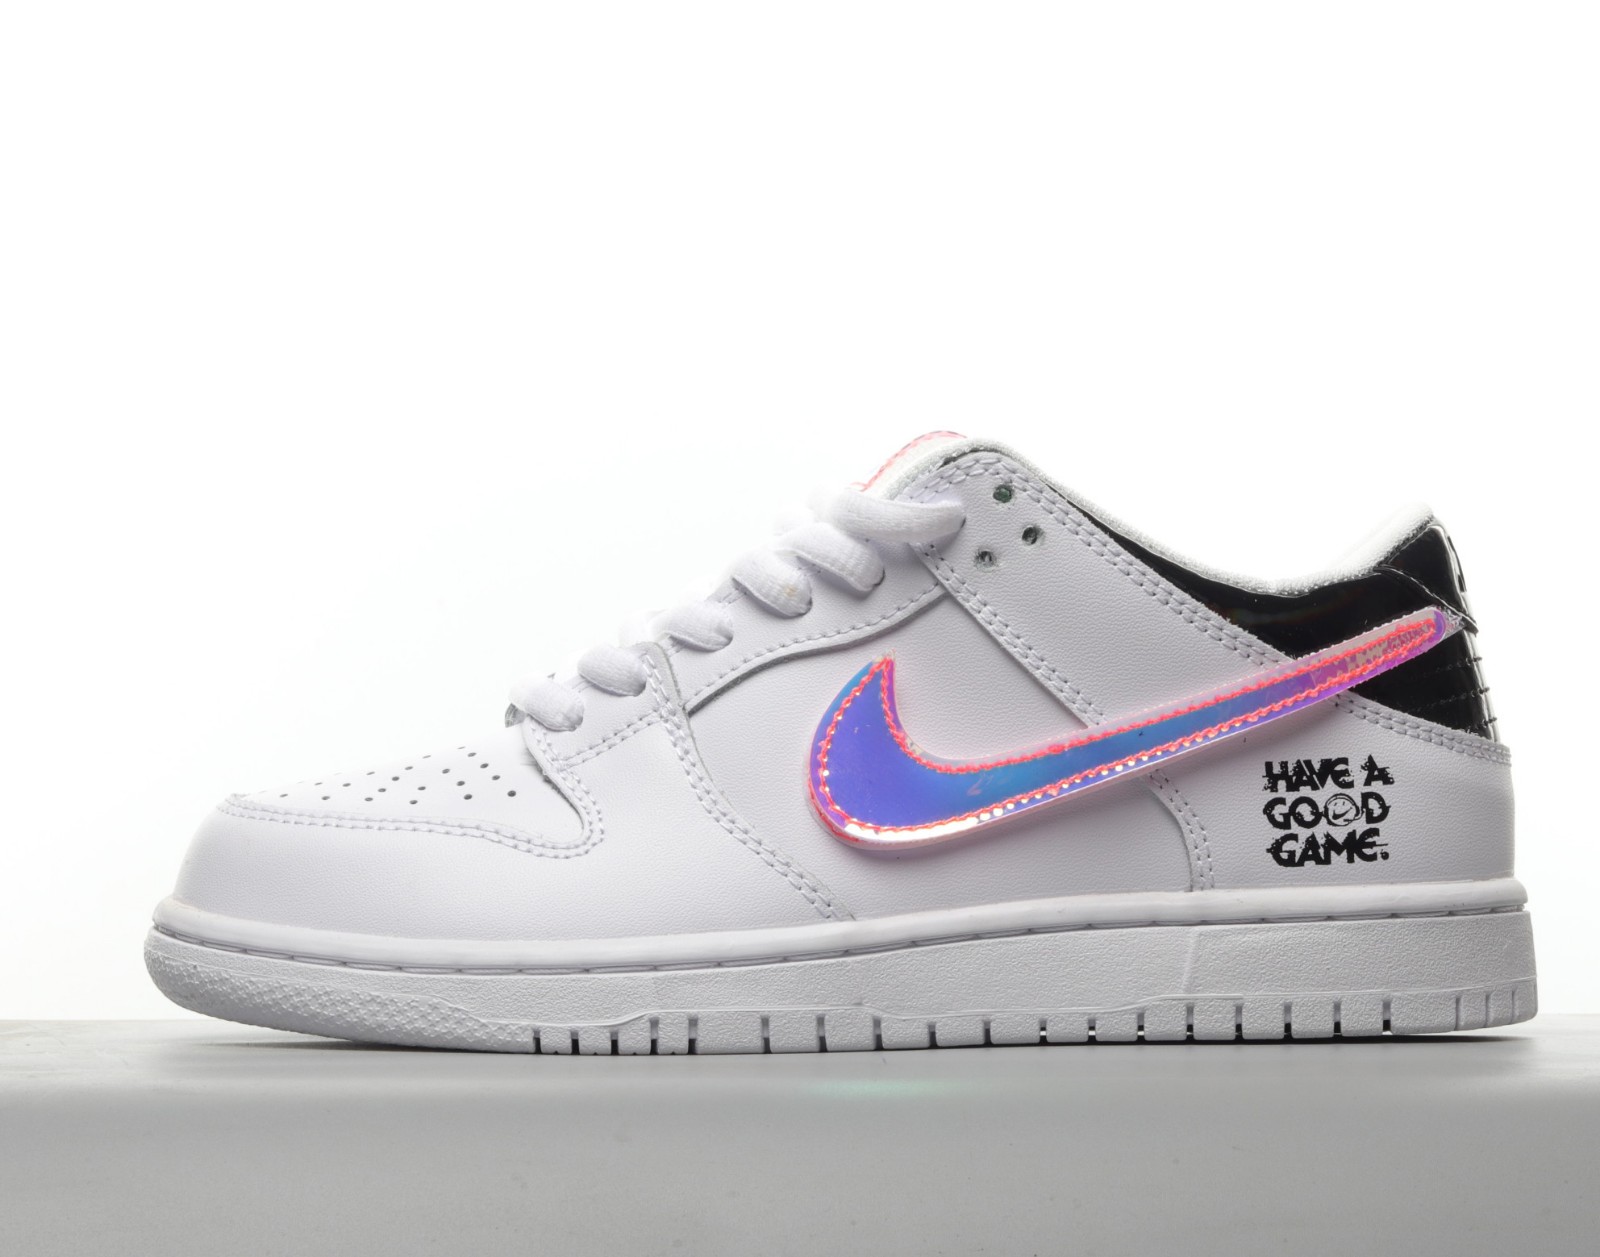 MultiscaleconsultingShops - Nike SB Low QS Have A Good Game White CZ0710 - cheap nike boots in china store - 191